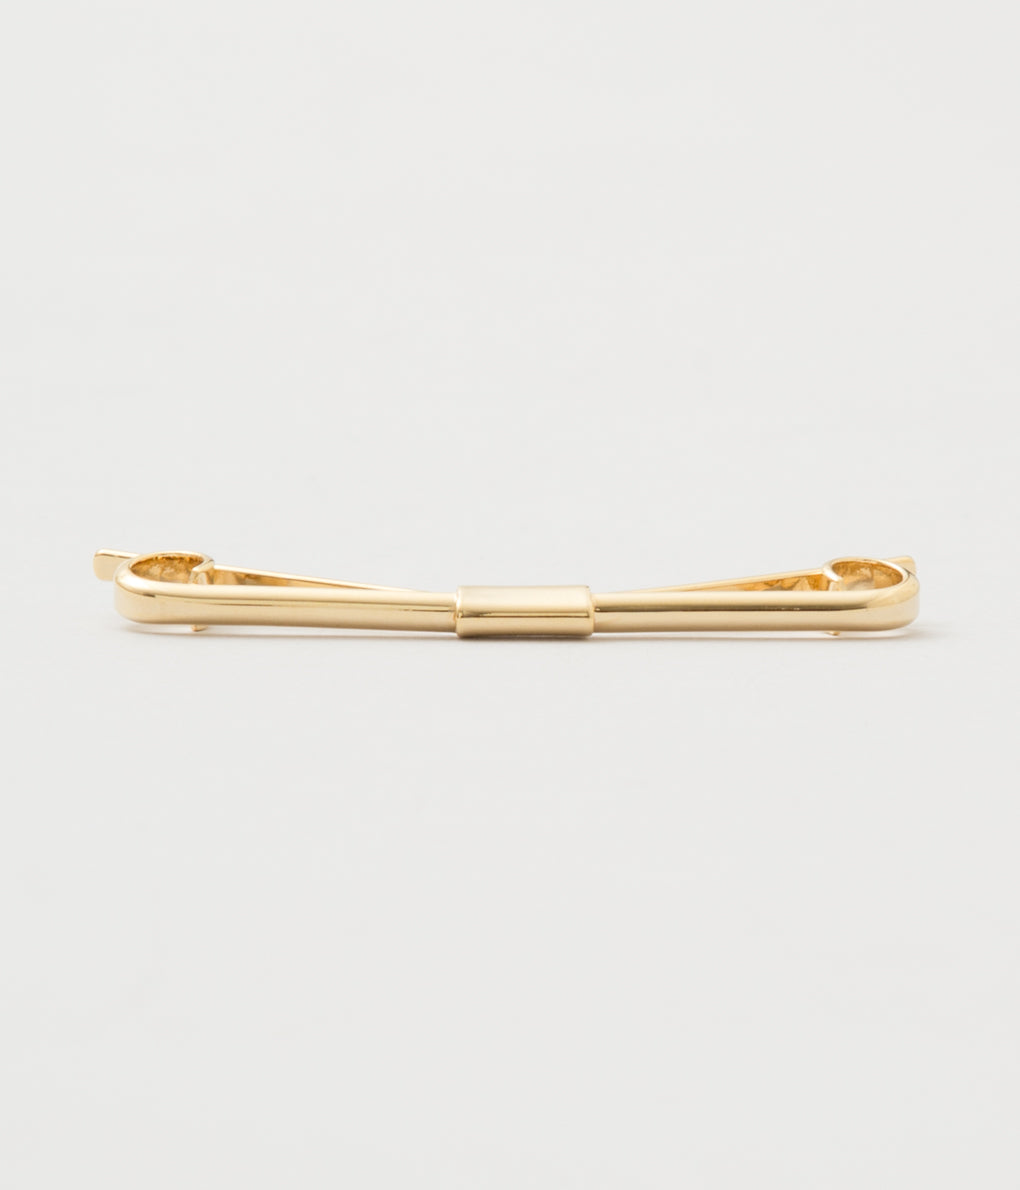 FINE AND DANDY "COLLAR BARS CURLED" (GOLD)